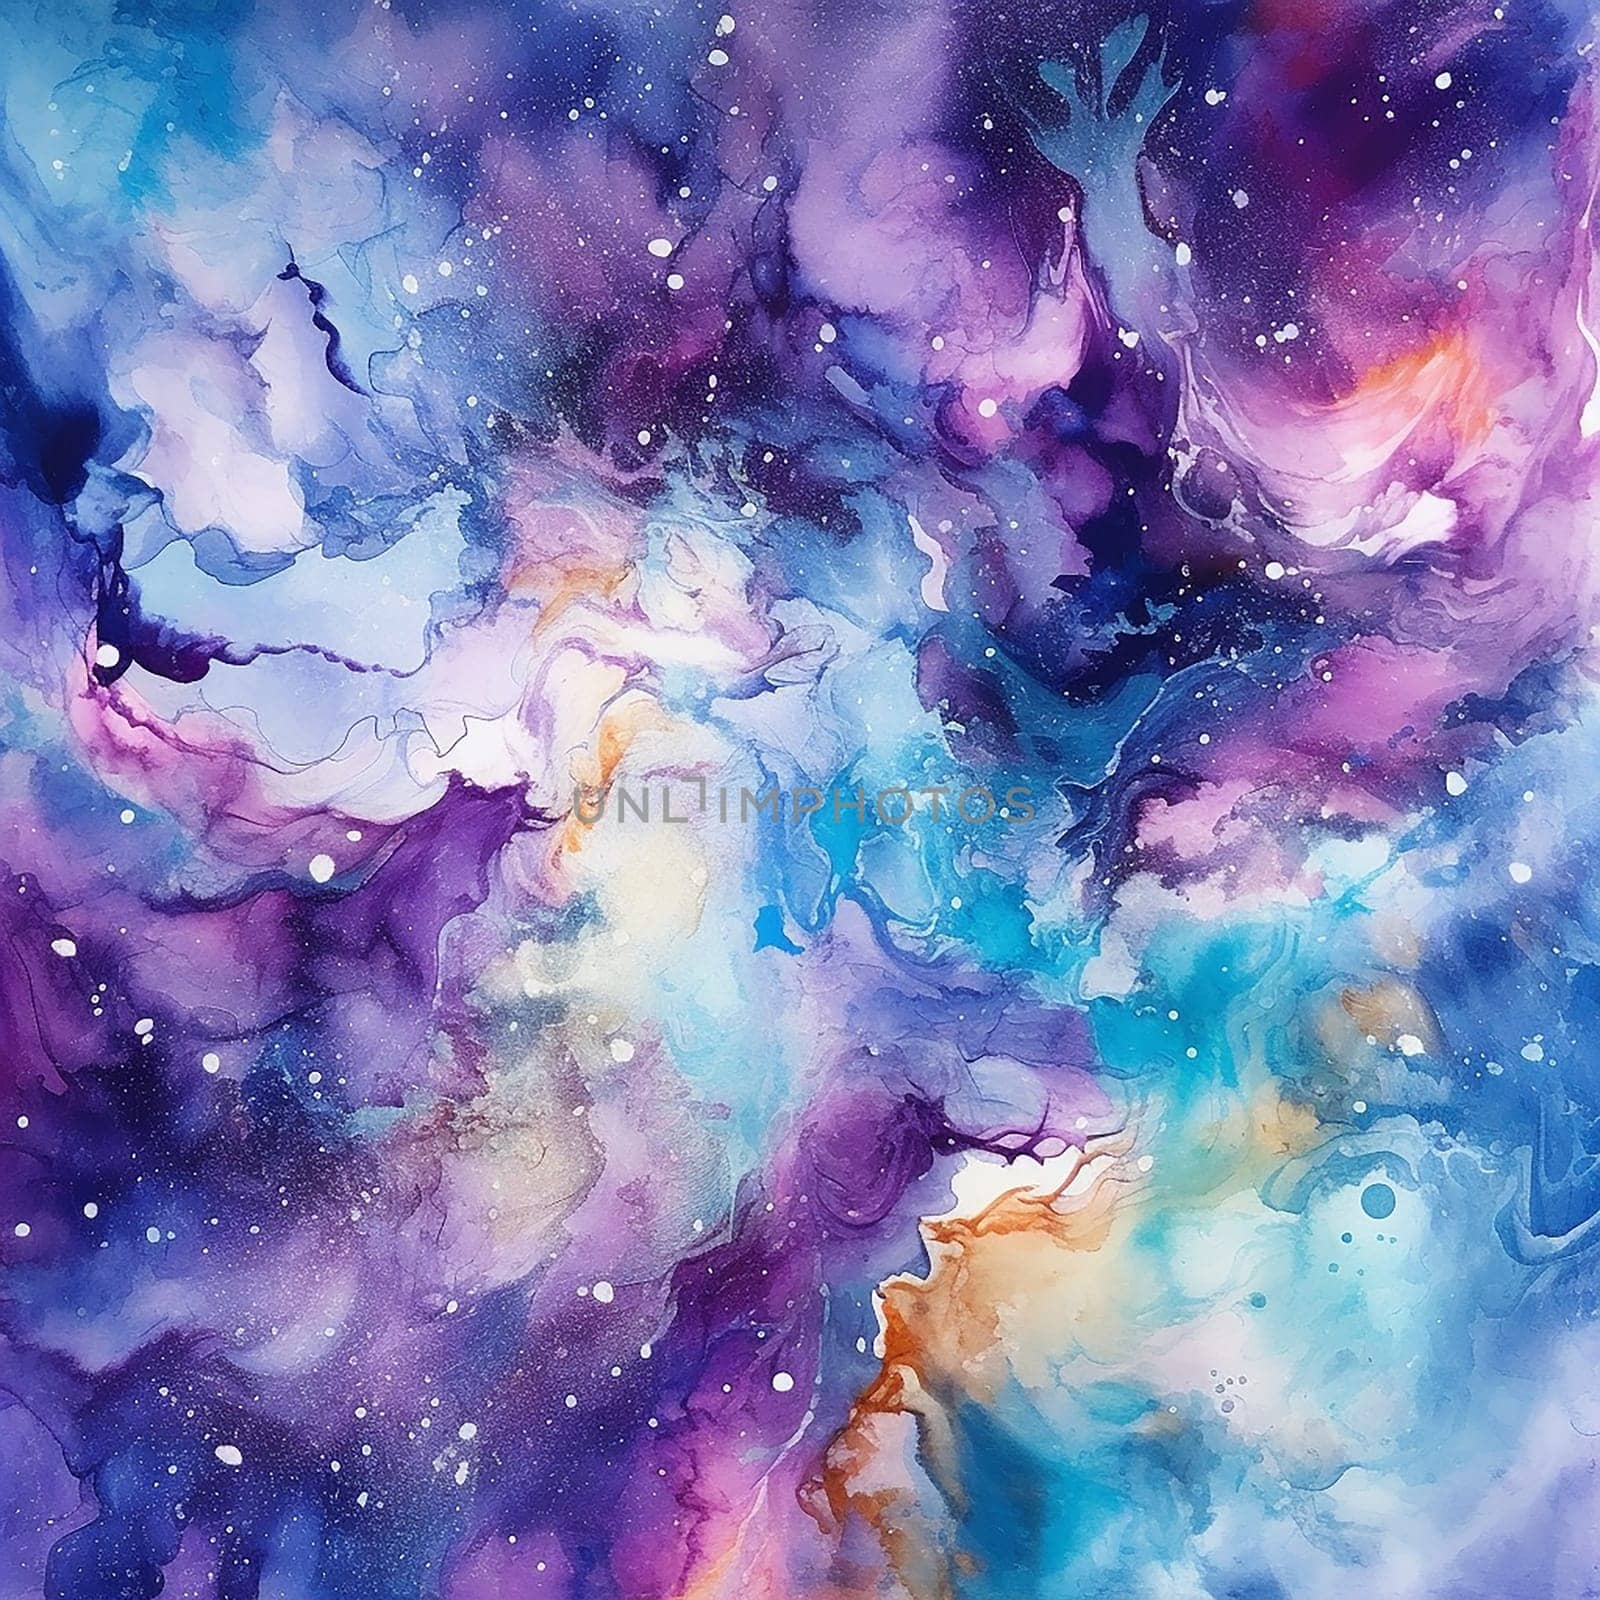 Galaxy background with stars and starry night, landscape of an astronomy sky, fantasy illustration